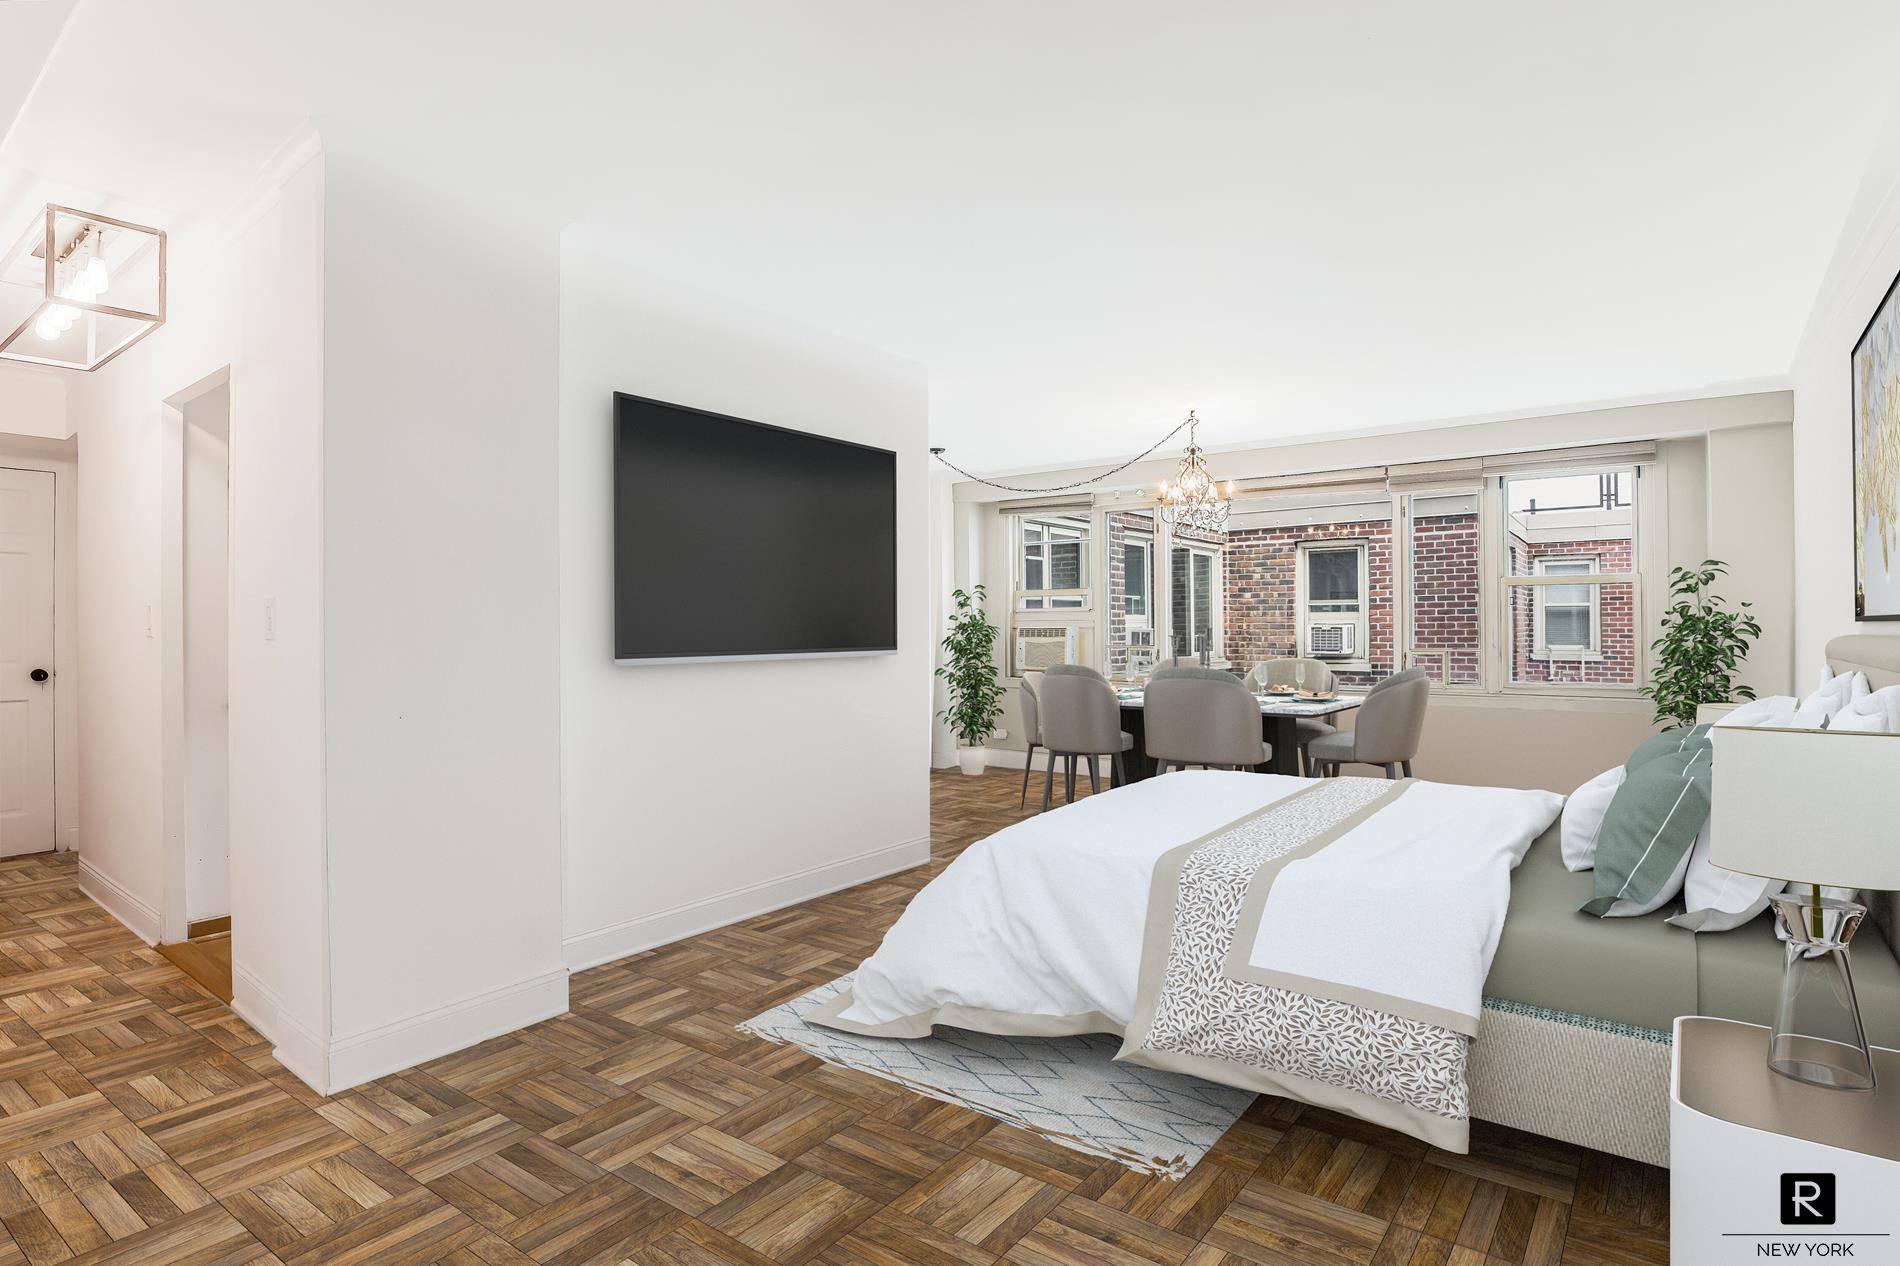 Welcome to this charming one bedroom co op apartment at 900 W 190th Street, nestled in the heart of Hudson Heights, Manhattan.